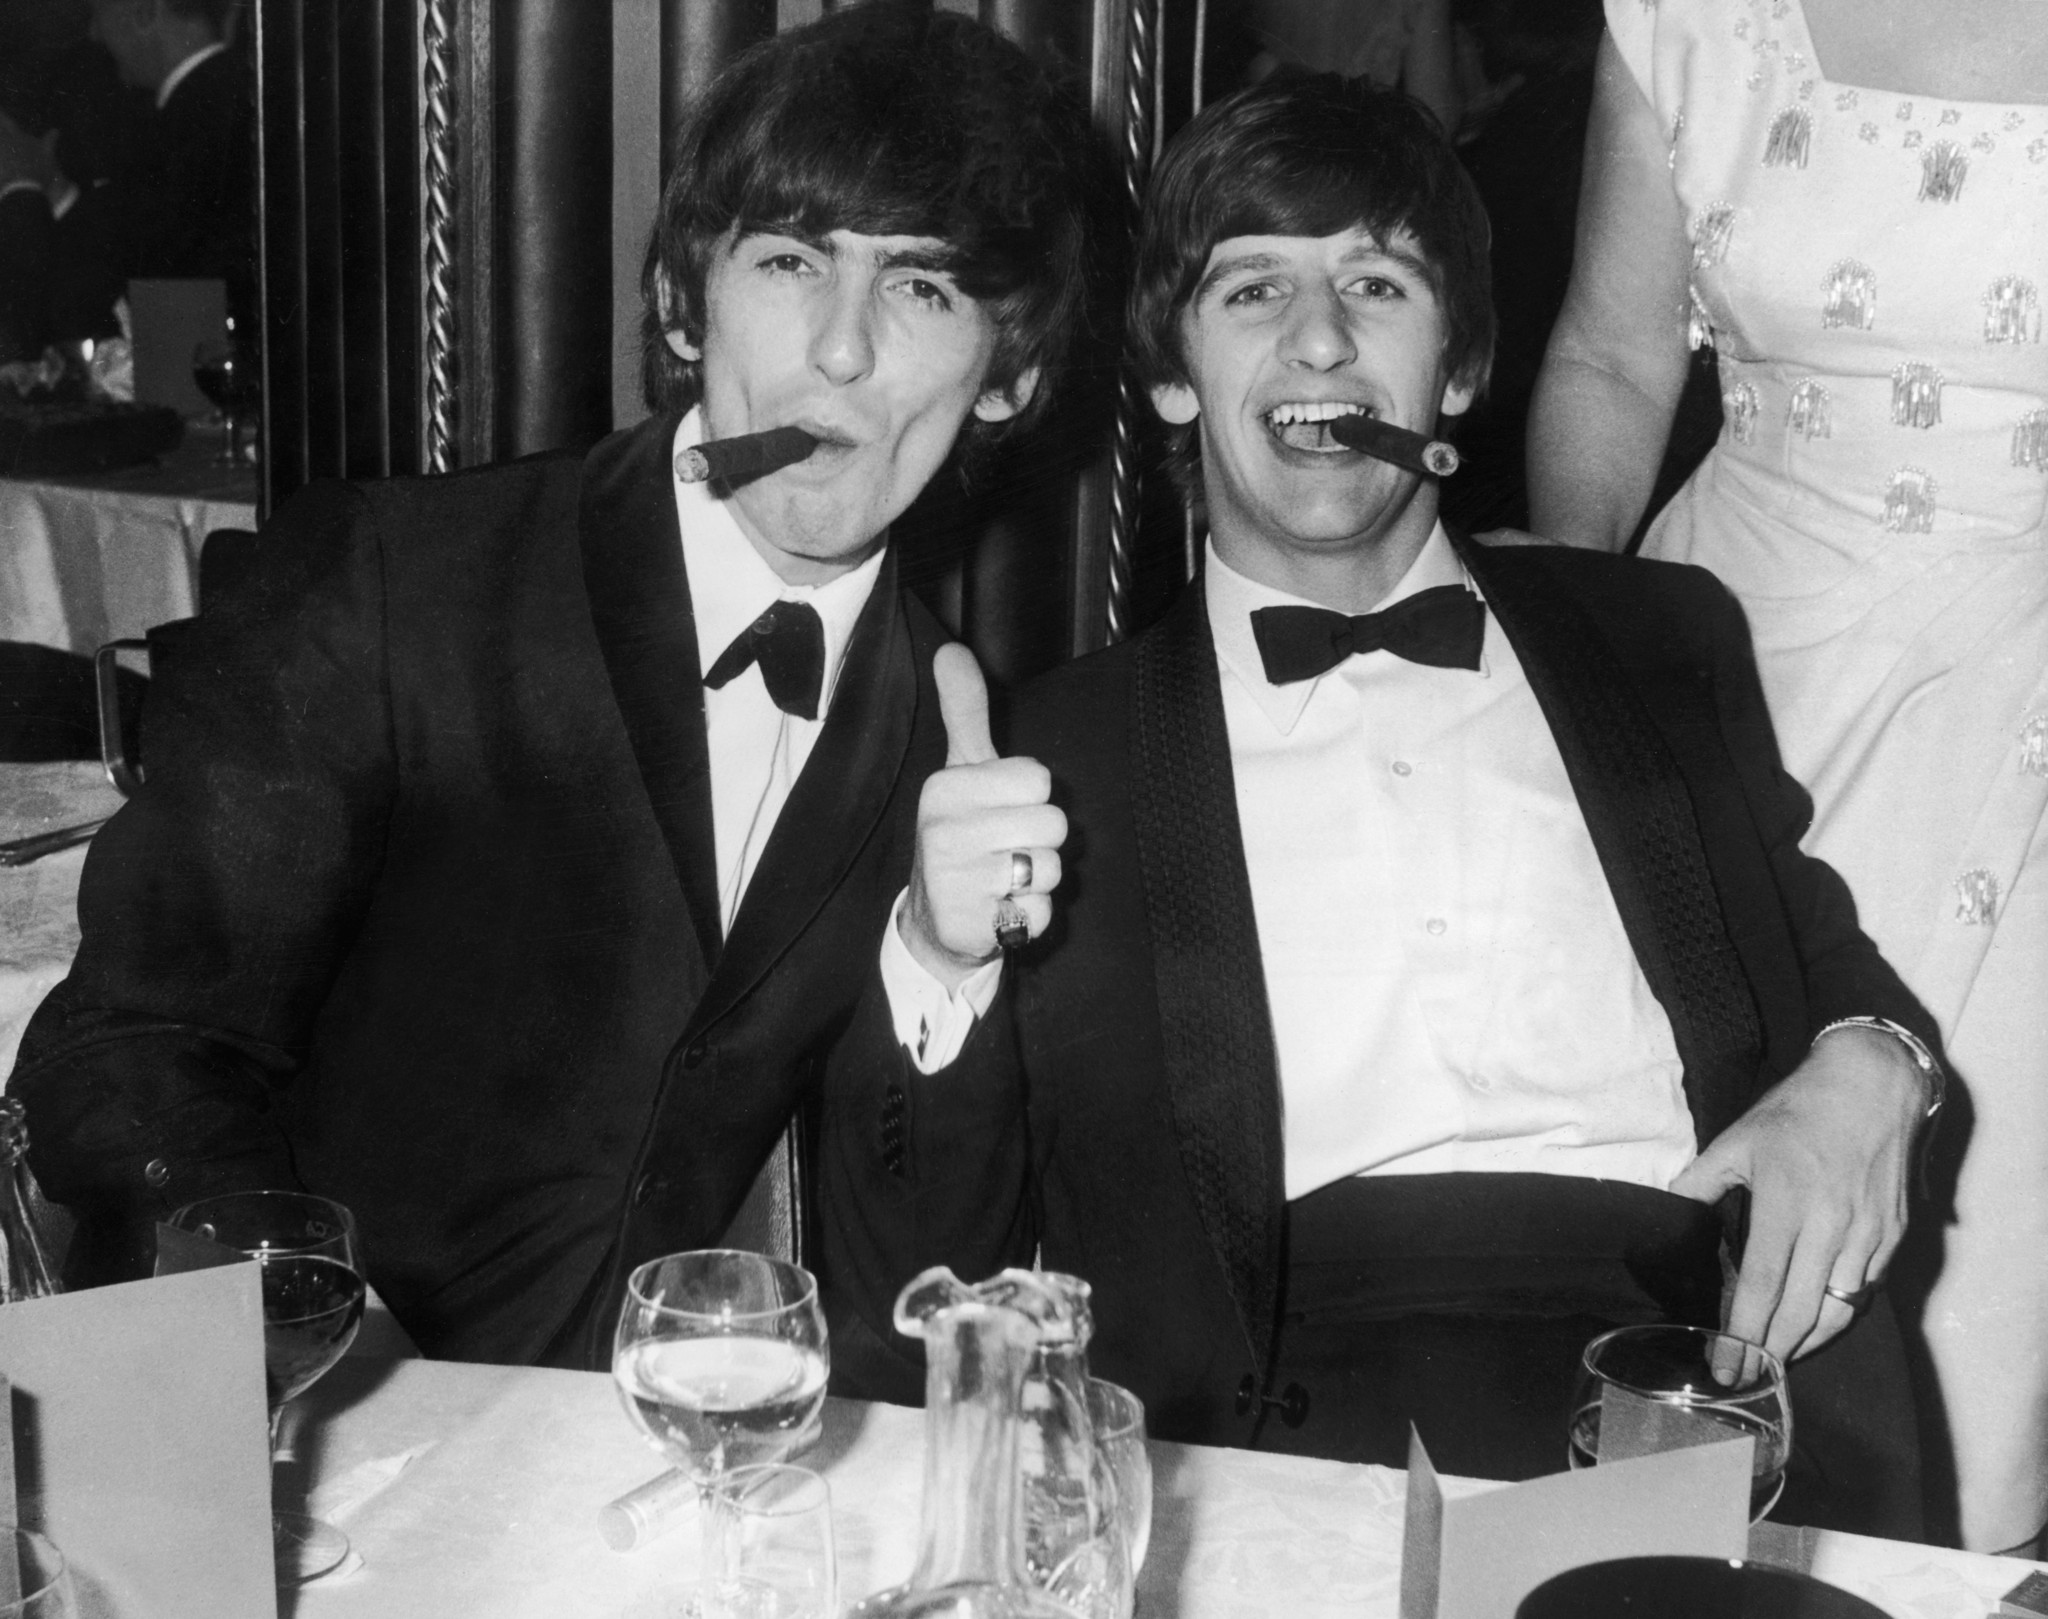 392279 10: (FILE PHOTO) Beatles George Harrison (L) and Ringo Starr smoke cigars in tuxedos after the presentation of the Carl Allen Awards March 23, 1964 in London. It was reported November 8, 2001 that Harrison is undergoing cancer treatment in a Staten Island, NY hospital. The 58-year-old ex-Beatle was diagnosed with lung cancer and a brain tumor earlier this year. (Photo by Getty Images)